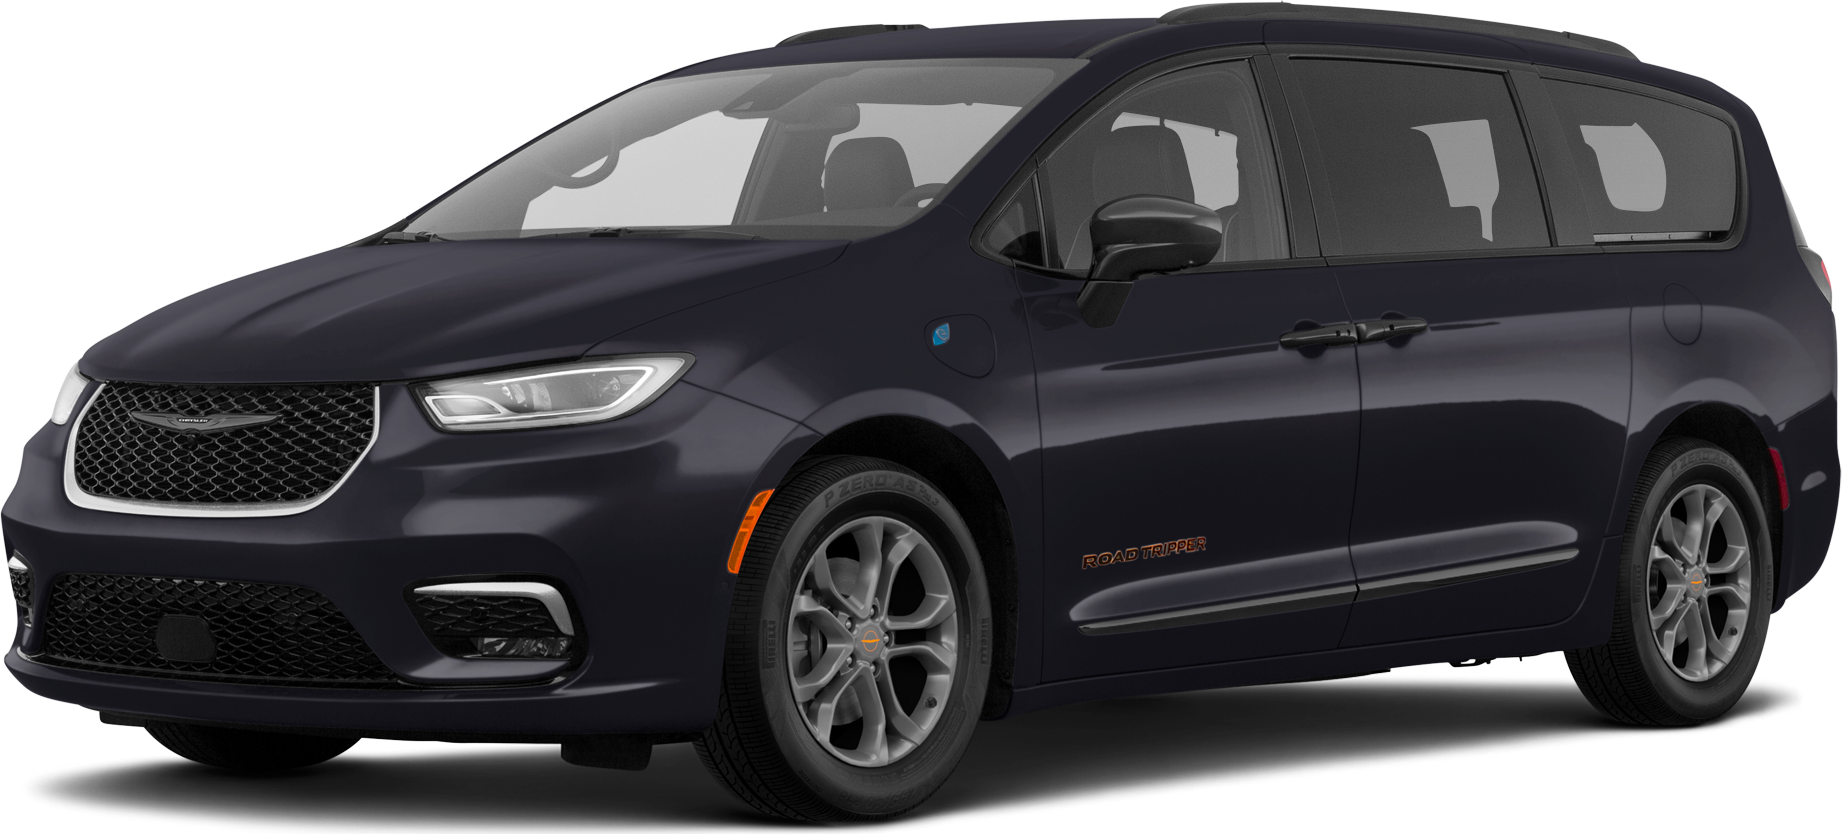 2020 Chrysler Pacifica Review, Pricing, and Specs